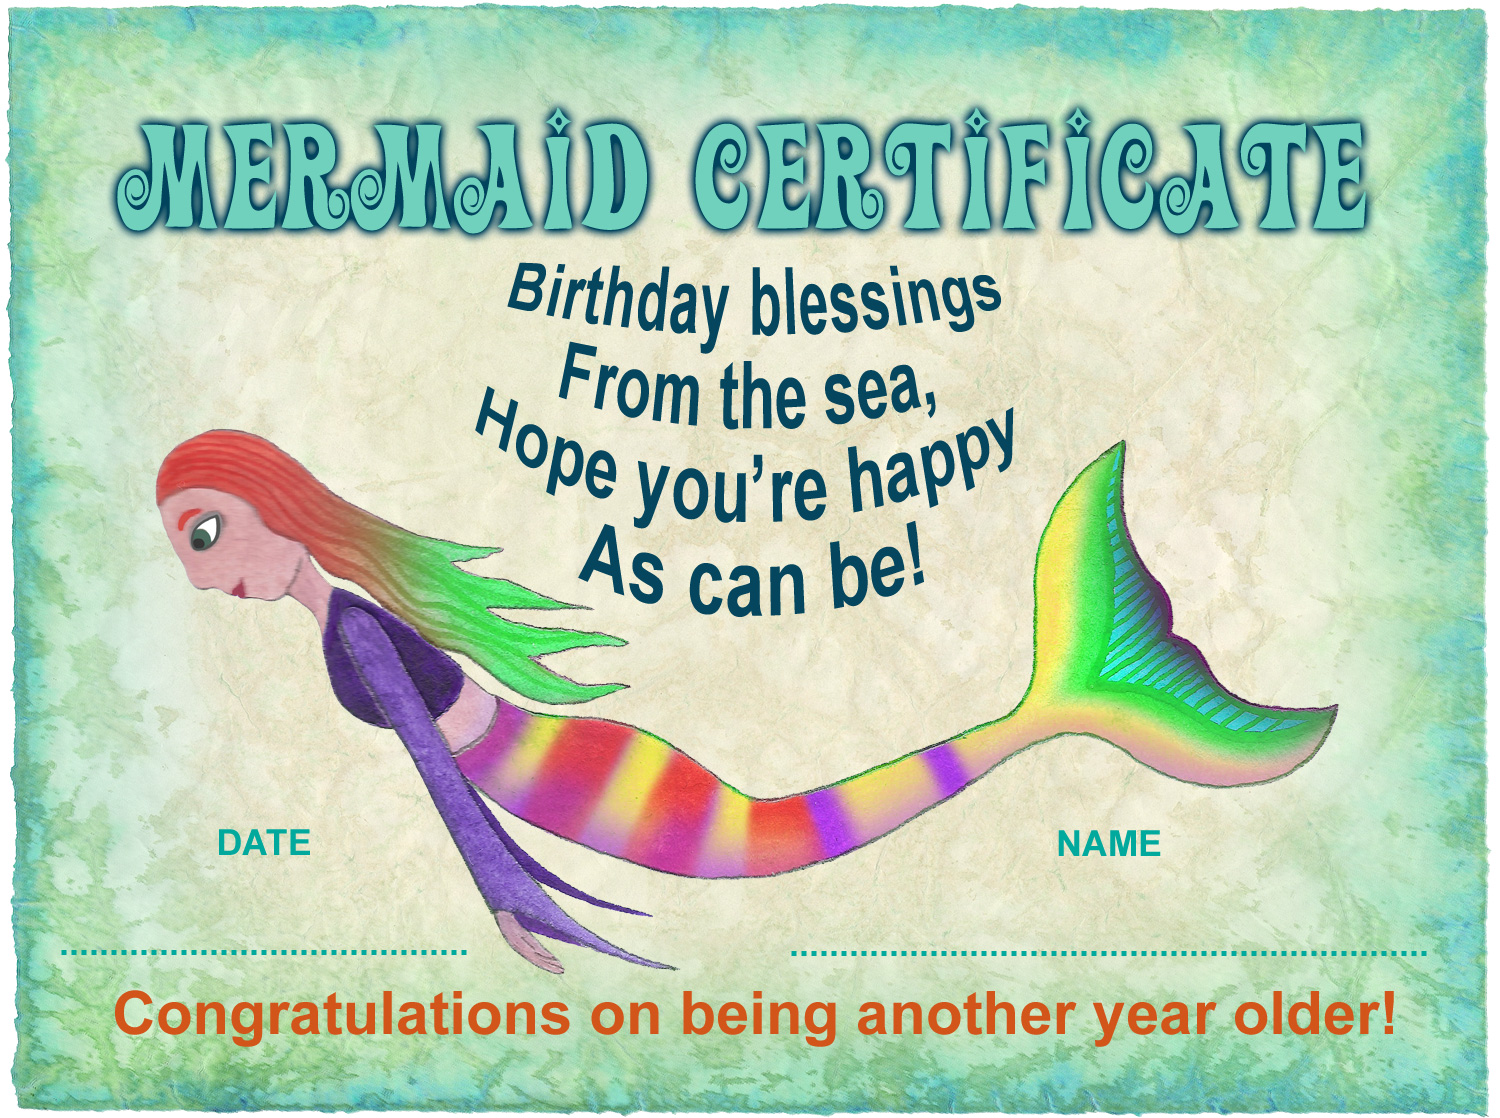 A certificate from the mermaids to wish you a happy birthday!